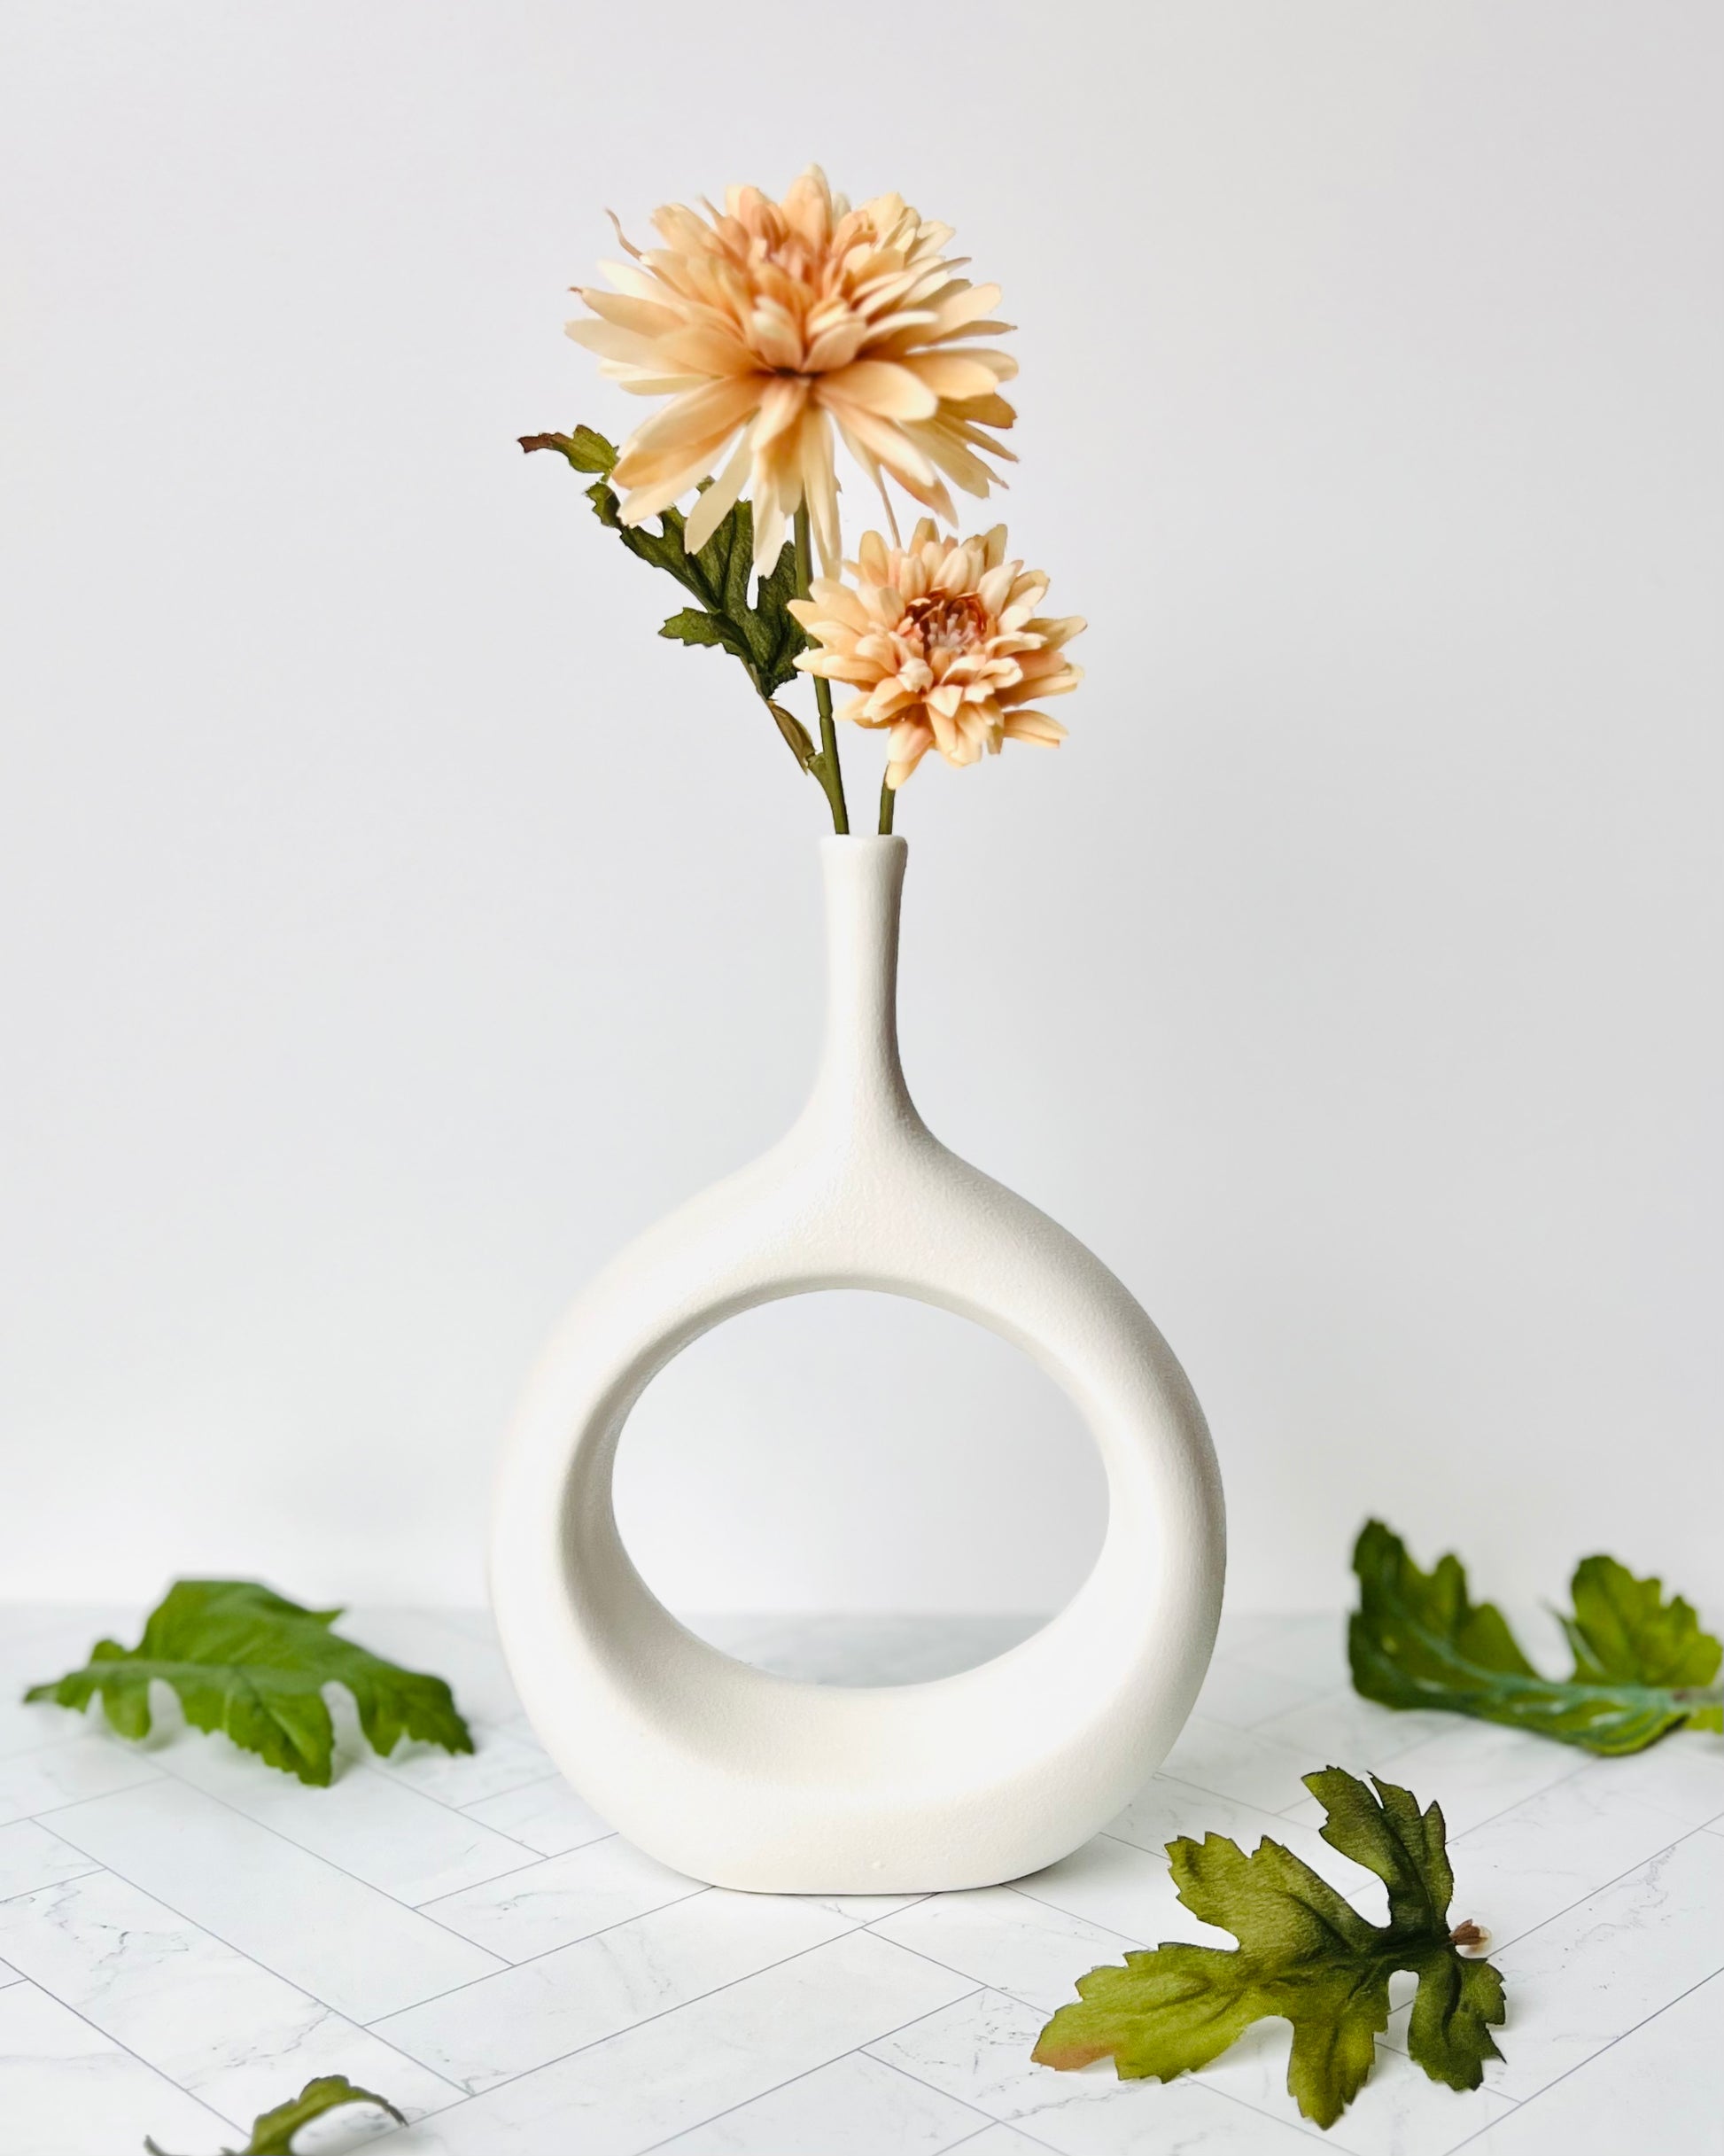 The Hollow Round Vase filled with an orange flower and with green leaves scattered around a white table